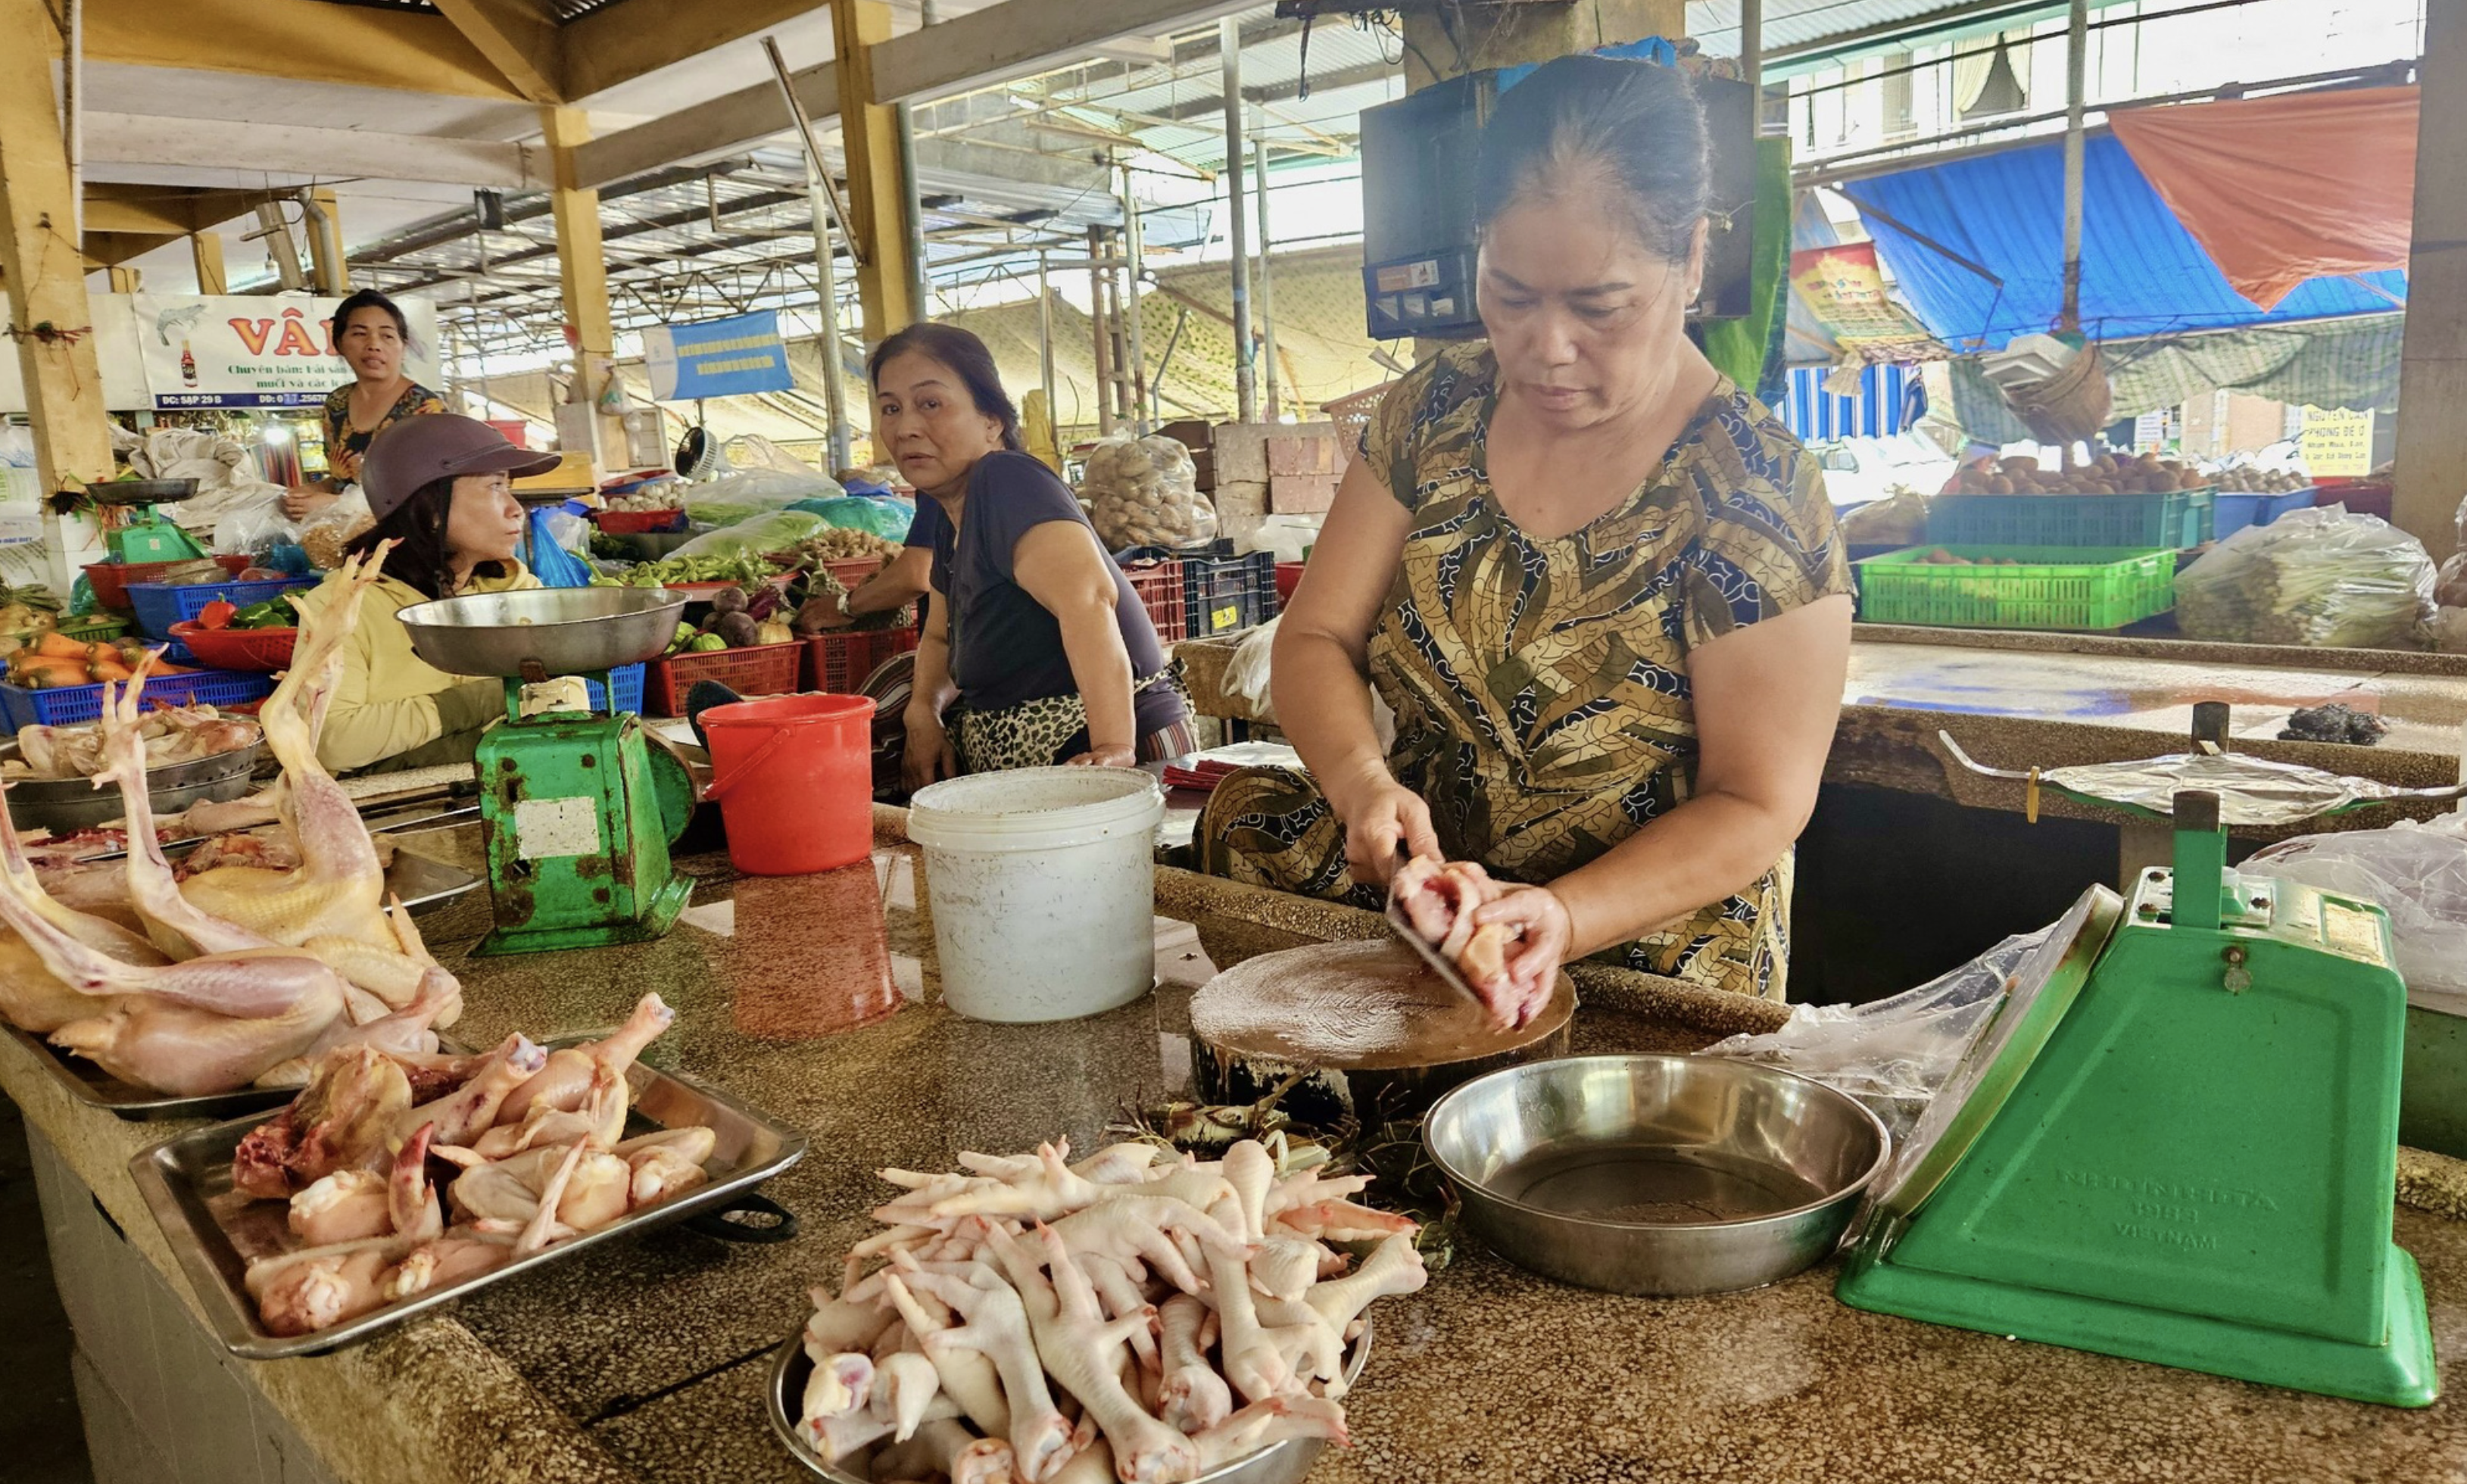 A stall of chicken at Xom Moi Market in Nha Trang City, Khanh Hoa Province, south-central Vietnam is pictured serving no customers. Photo: Minh Chien / Tuoi Tre